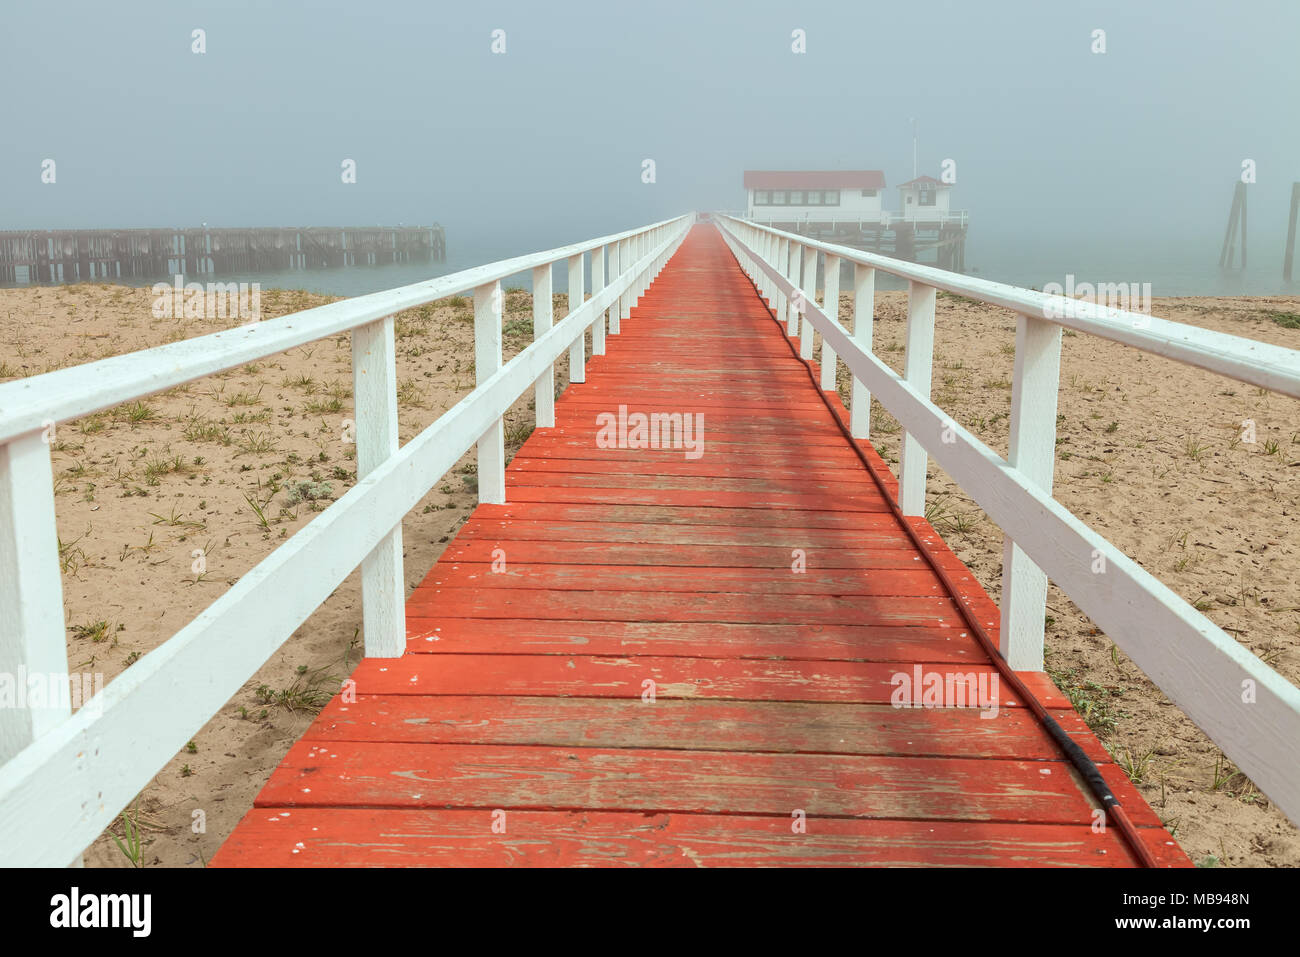 The red -painted deck which lead into the the Greater Farallones National Marine Sanctuary Facility in Crissy Field Beach, San Francisco, California Stock Photo